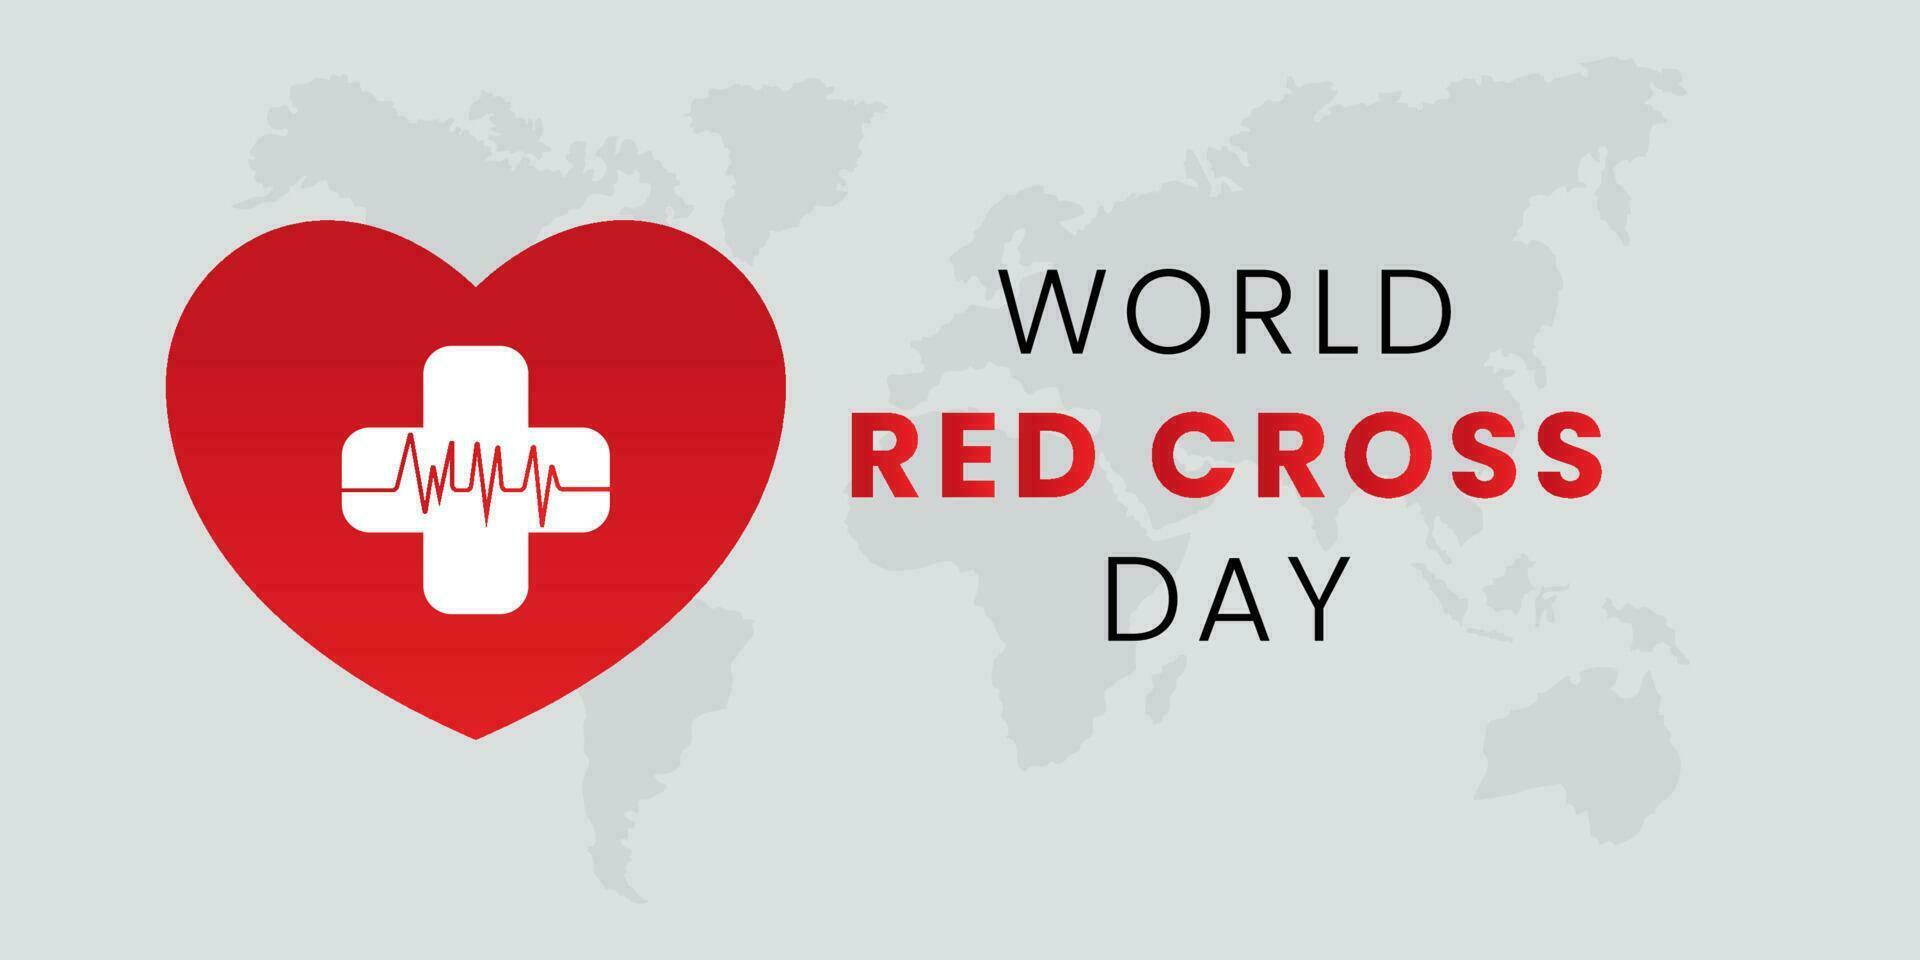 World red cross day on 8th may, concept vector illustration of red cross health concept with vector elements.